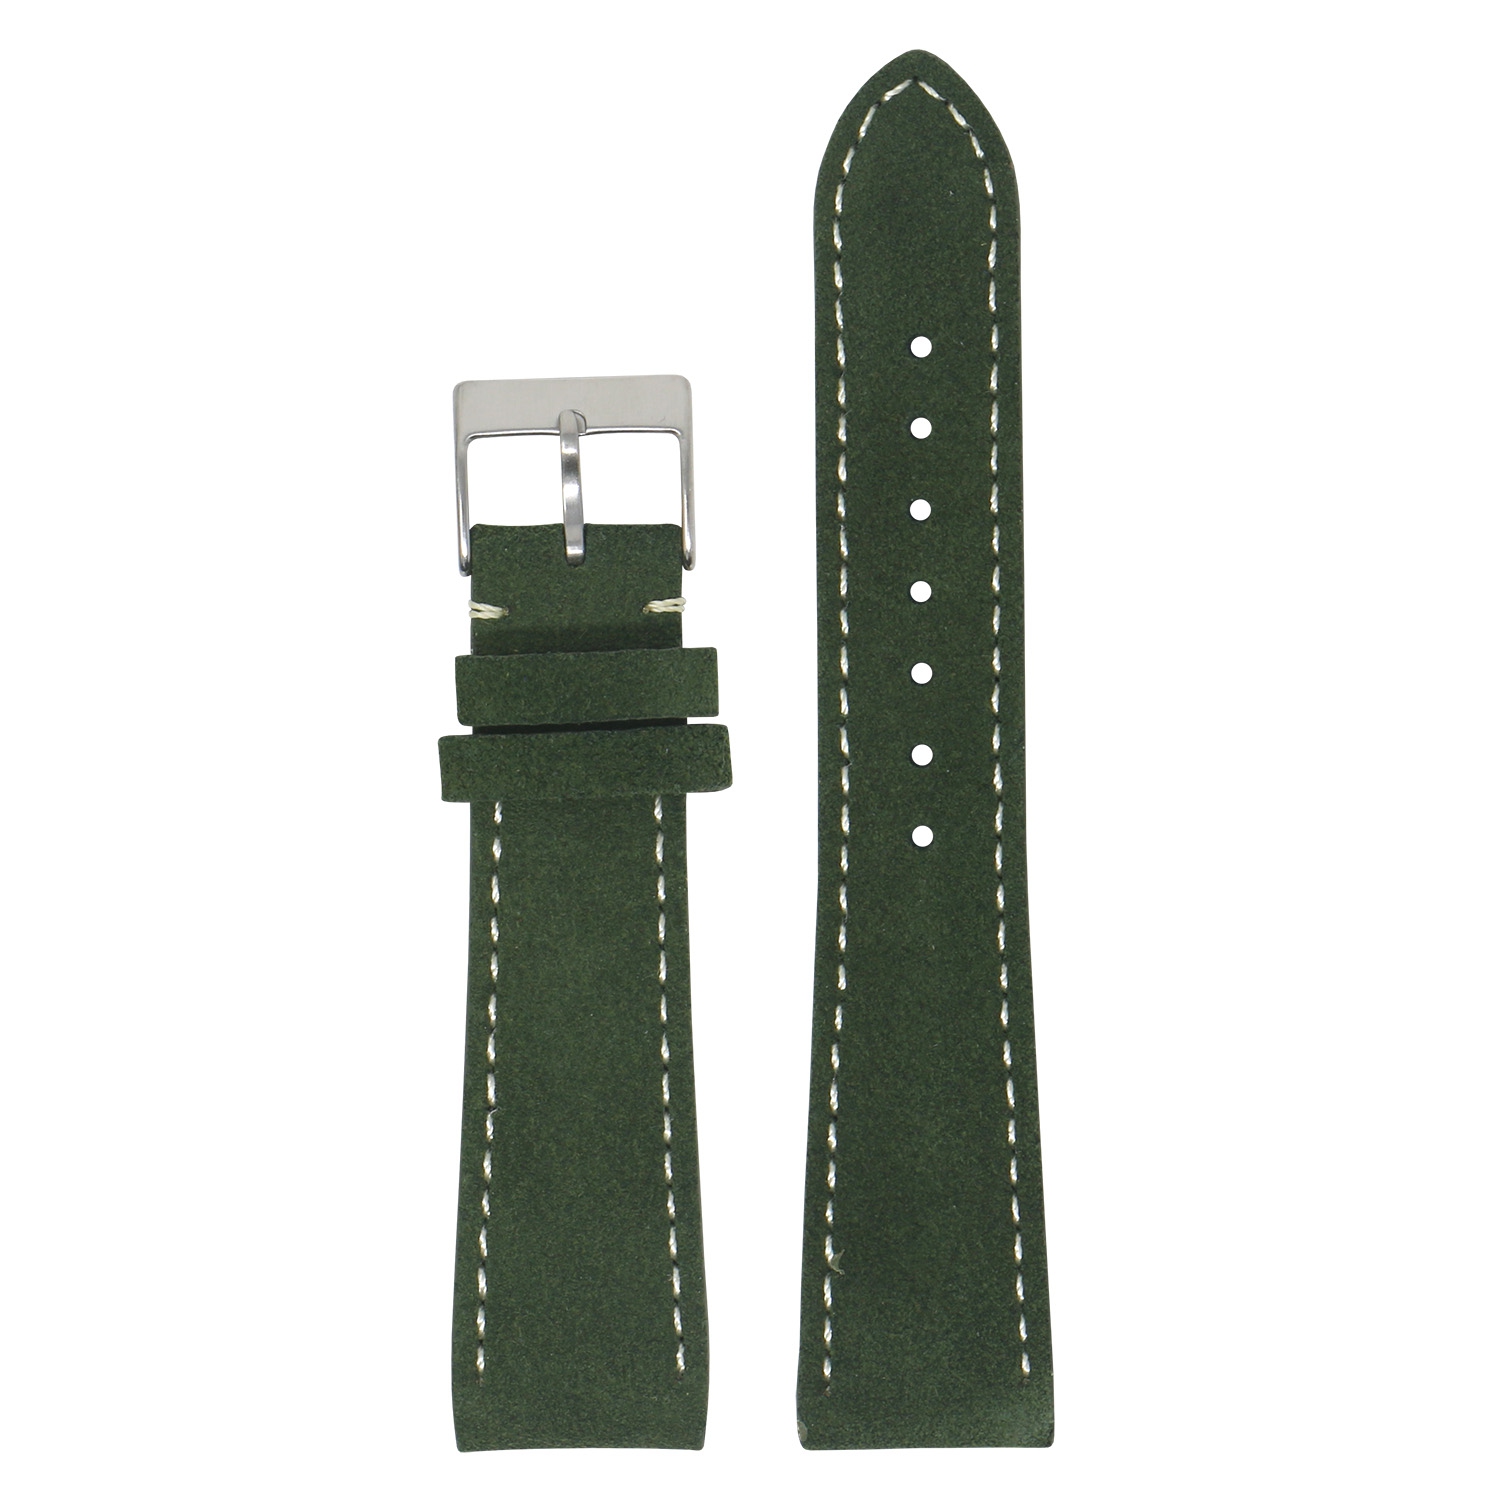 StrapsCo Classic Suede (Short, Standard, Long) Watch Band Strap for Samsung Galaxy Watch 3 - Standard Length - 22mm - For 45mm Galaxy Watch3 - Green